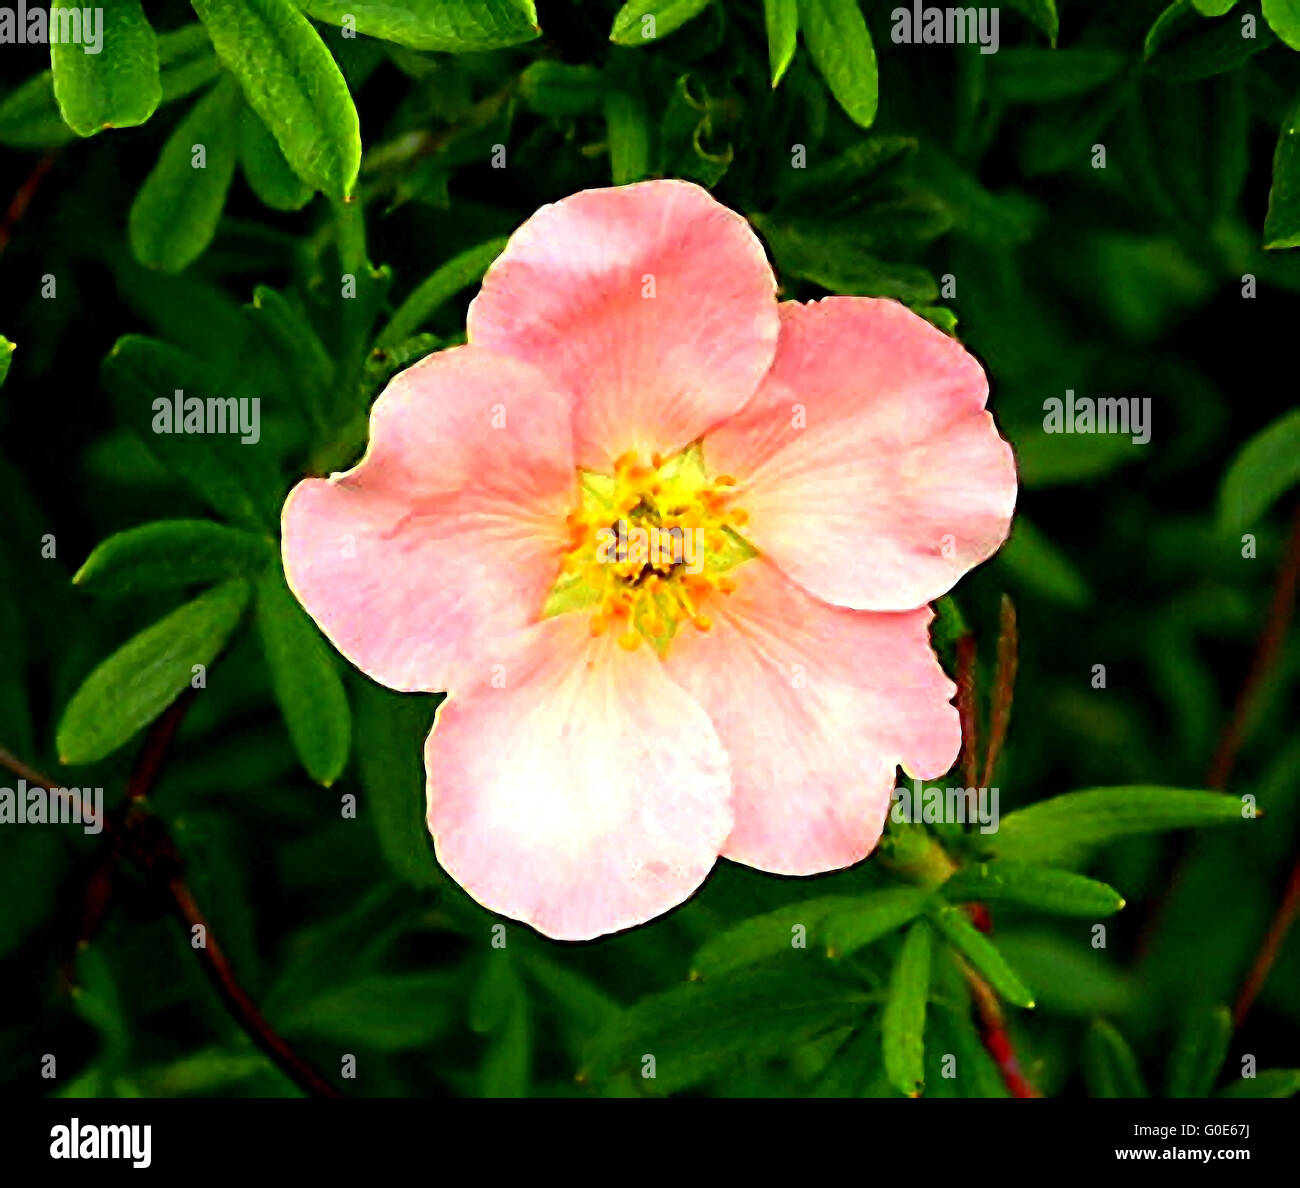 Five-Pink flower on a background of green leaves,illuminated by sunlight. Stock Photo